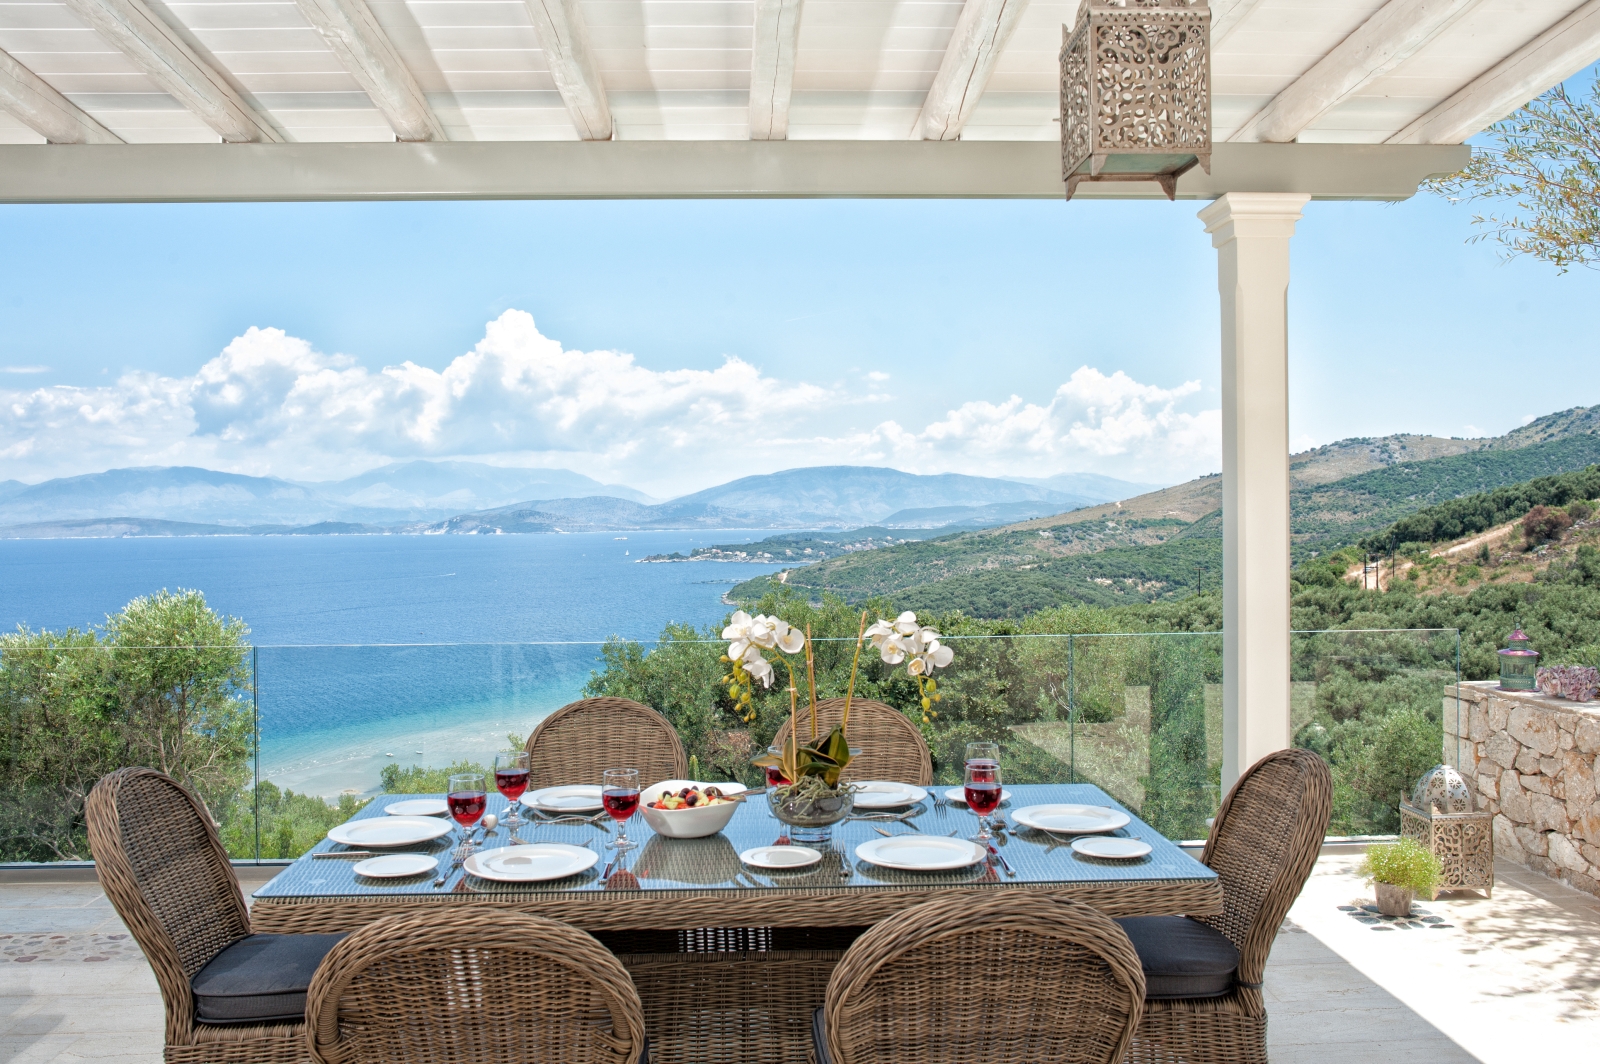 Outdoor dining table set for lunch with view towards the sea at Villa Dionysos, Corfu